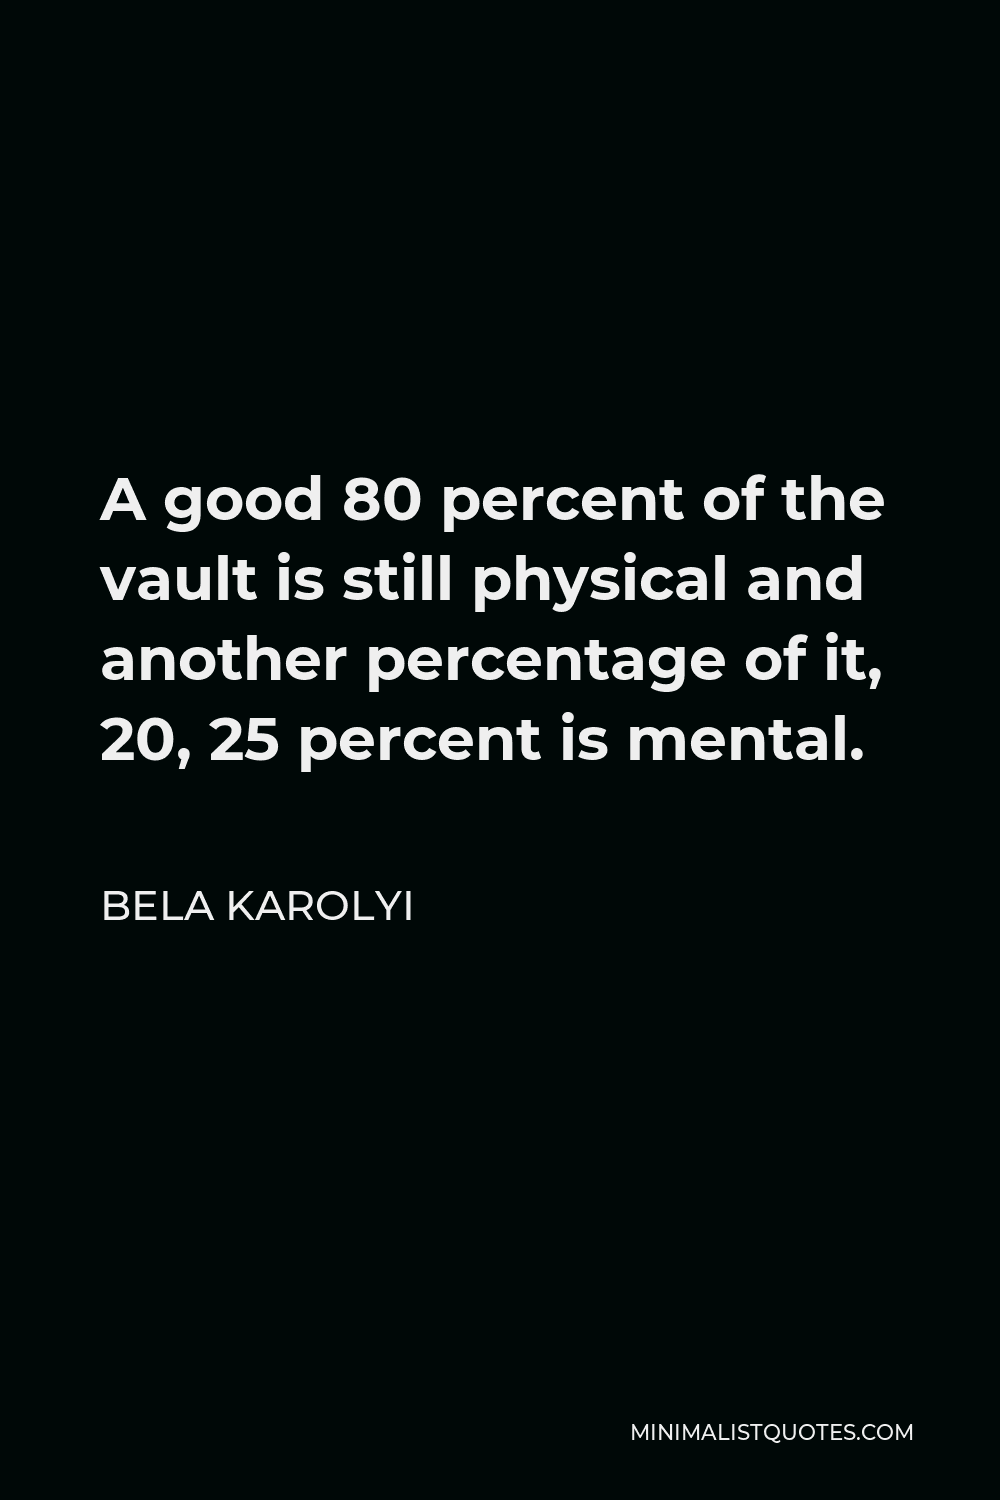 Bela Karolyi Quote - A good 80 percent of the vault is still physical and another percentage of it, 20, 25 percent is mental.